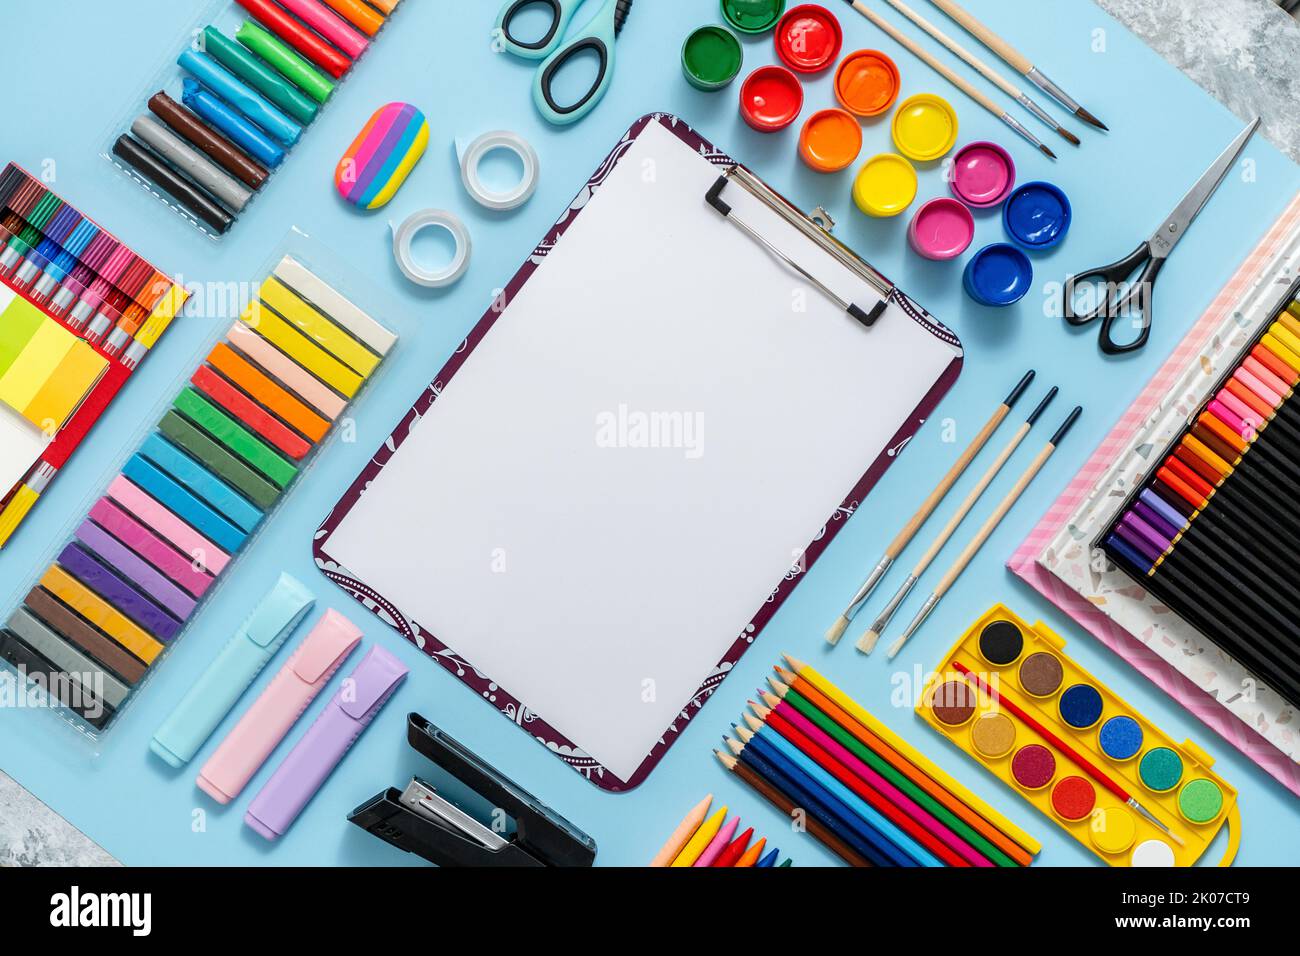 https://c8.alamy.com/comp/2K07CT9/colorful-school-supplies-placed-on-blue-background-with-white-plain-paper-in-the-middle-2K07CT9.jpg